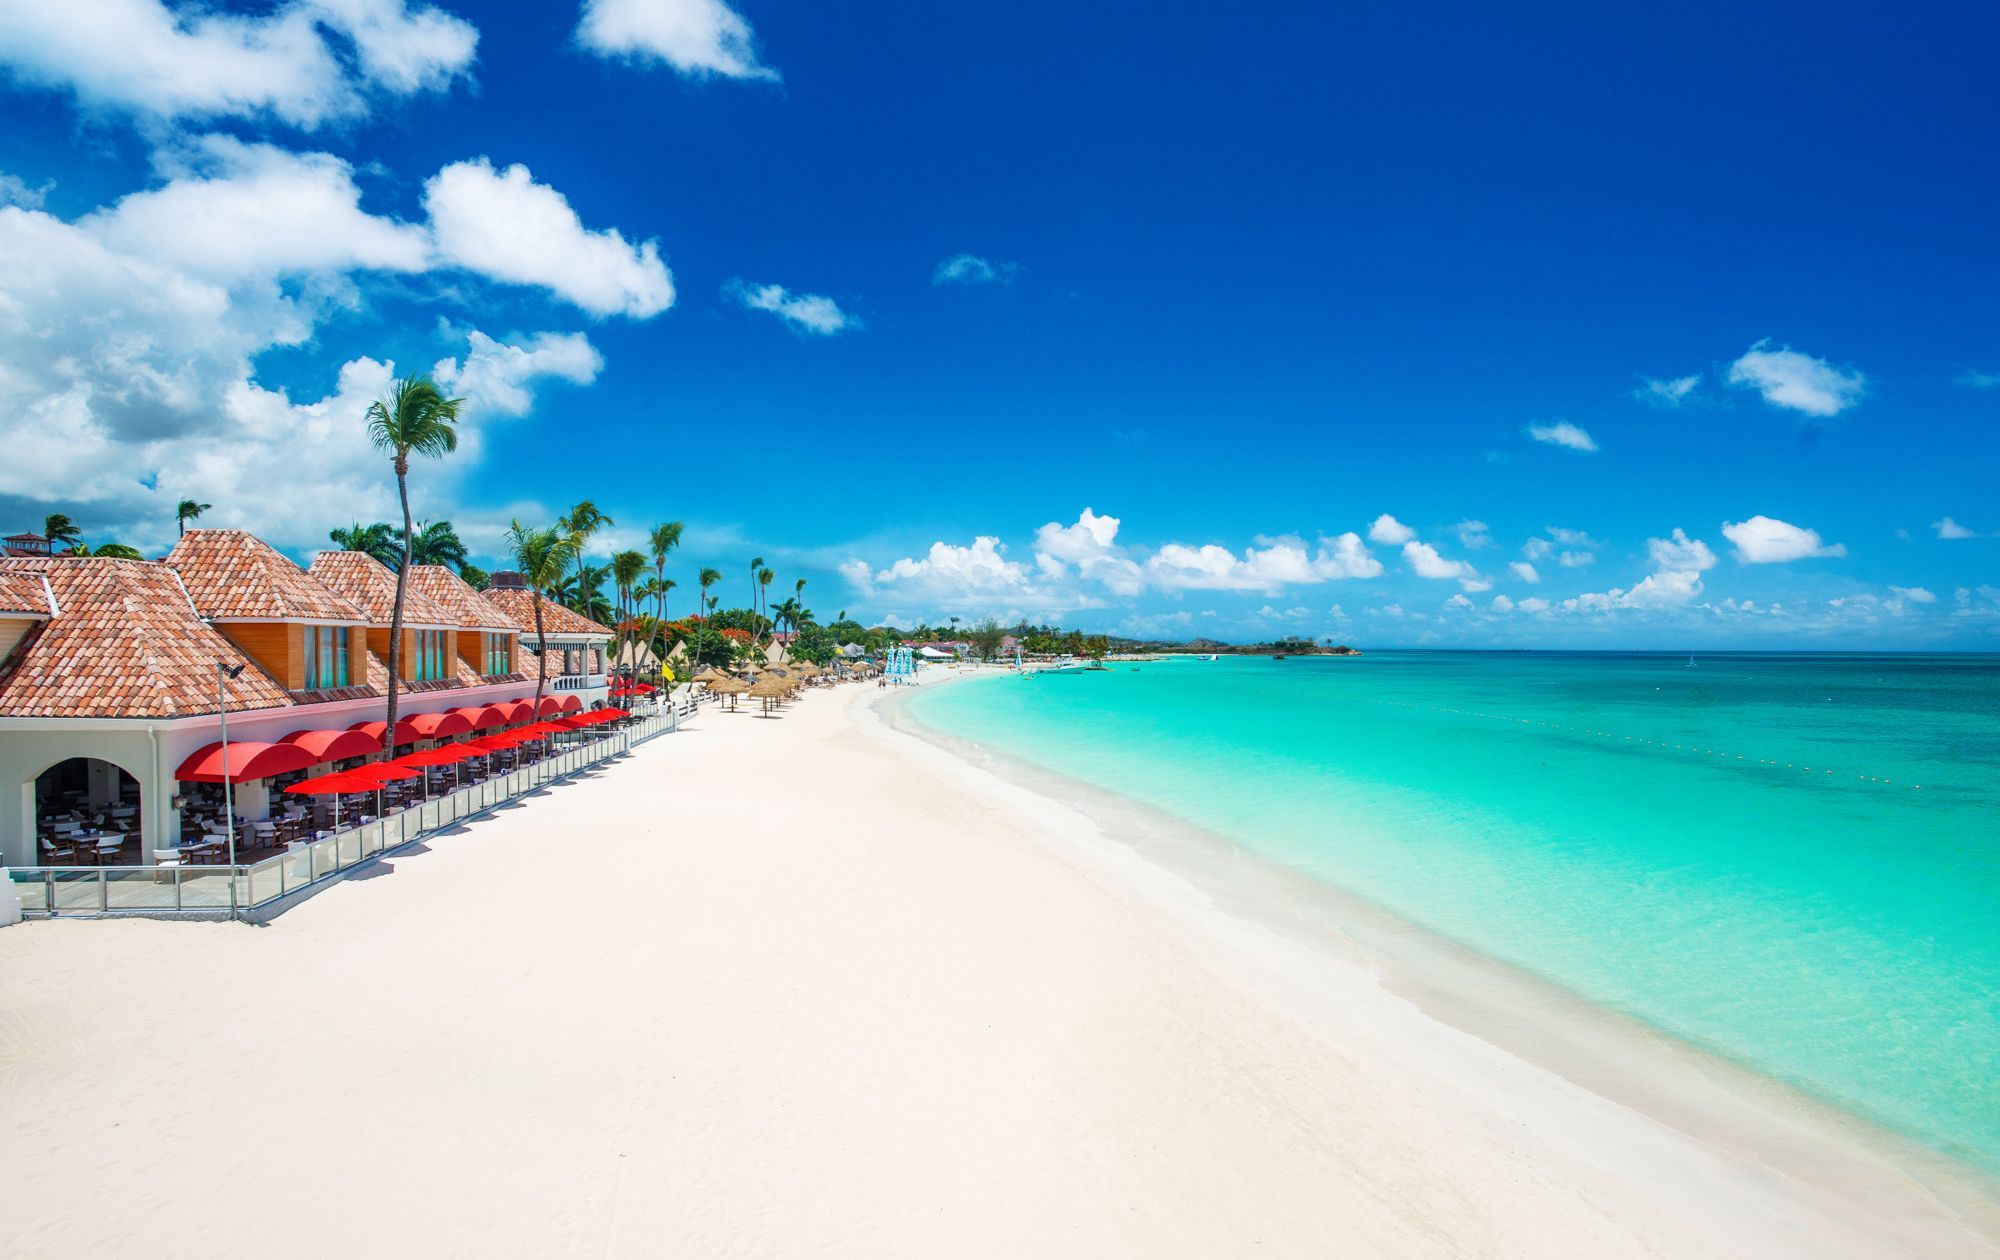 What It's Really Like Staying at Sandals Resorts - Luxe Adventure Traveler